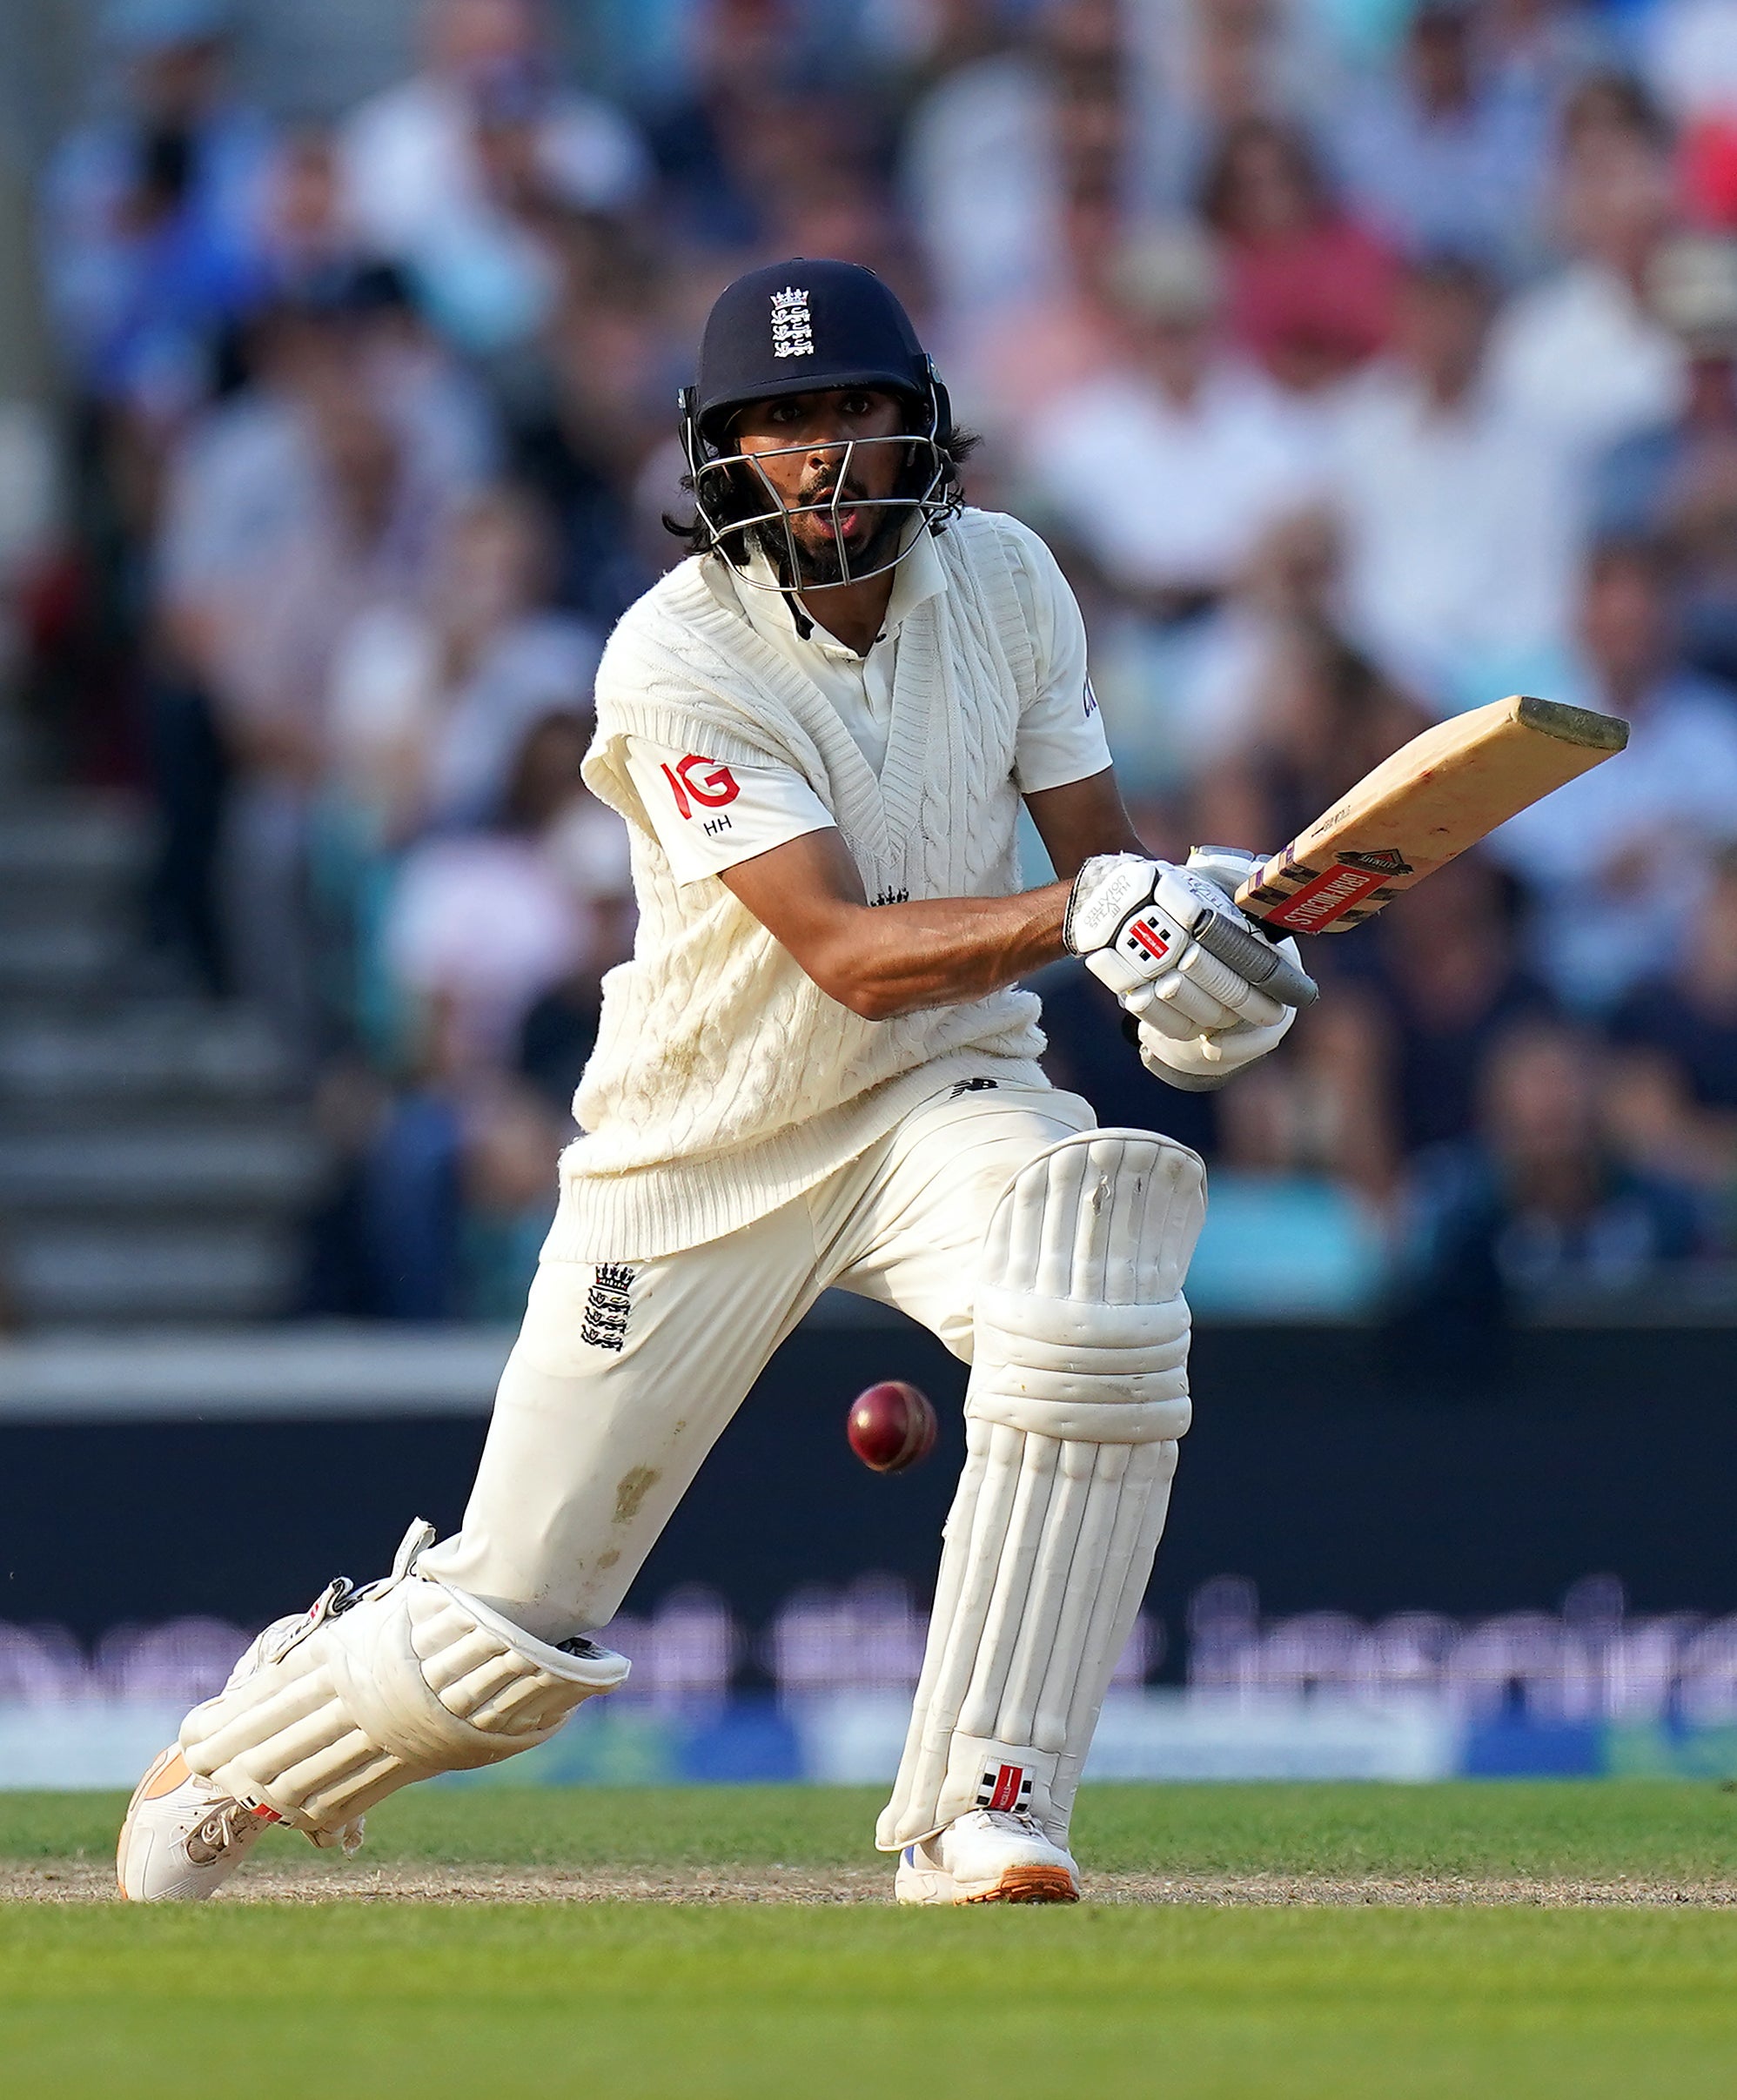 Haseeb Hameed helped England make a strong start to the final innings of the Oval Test match against India (Adam Davy/PA)